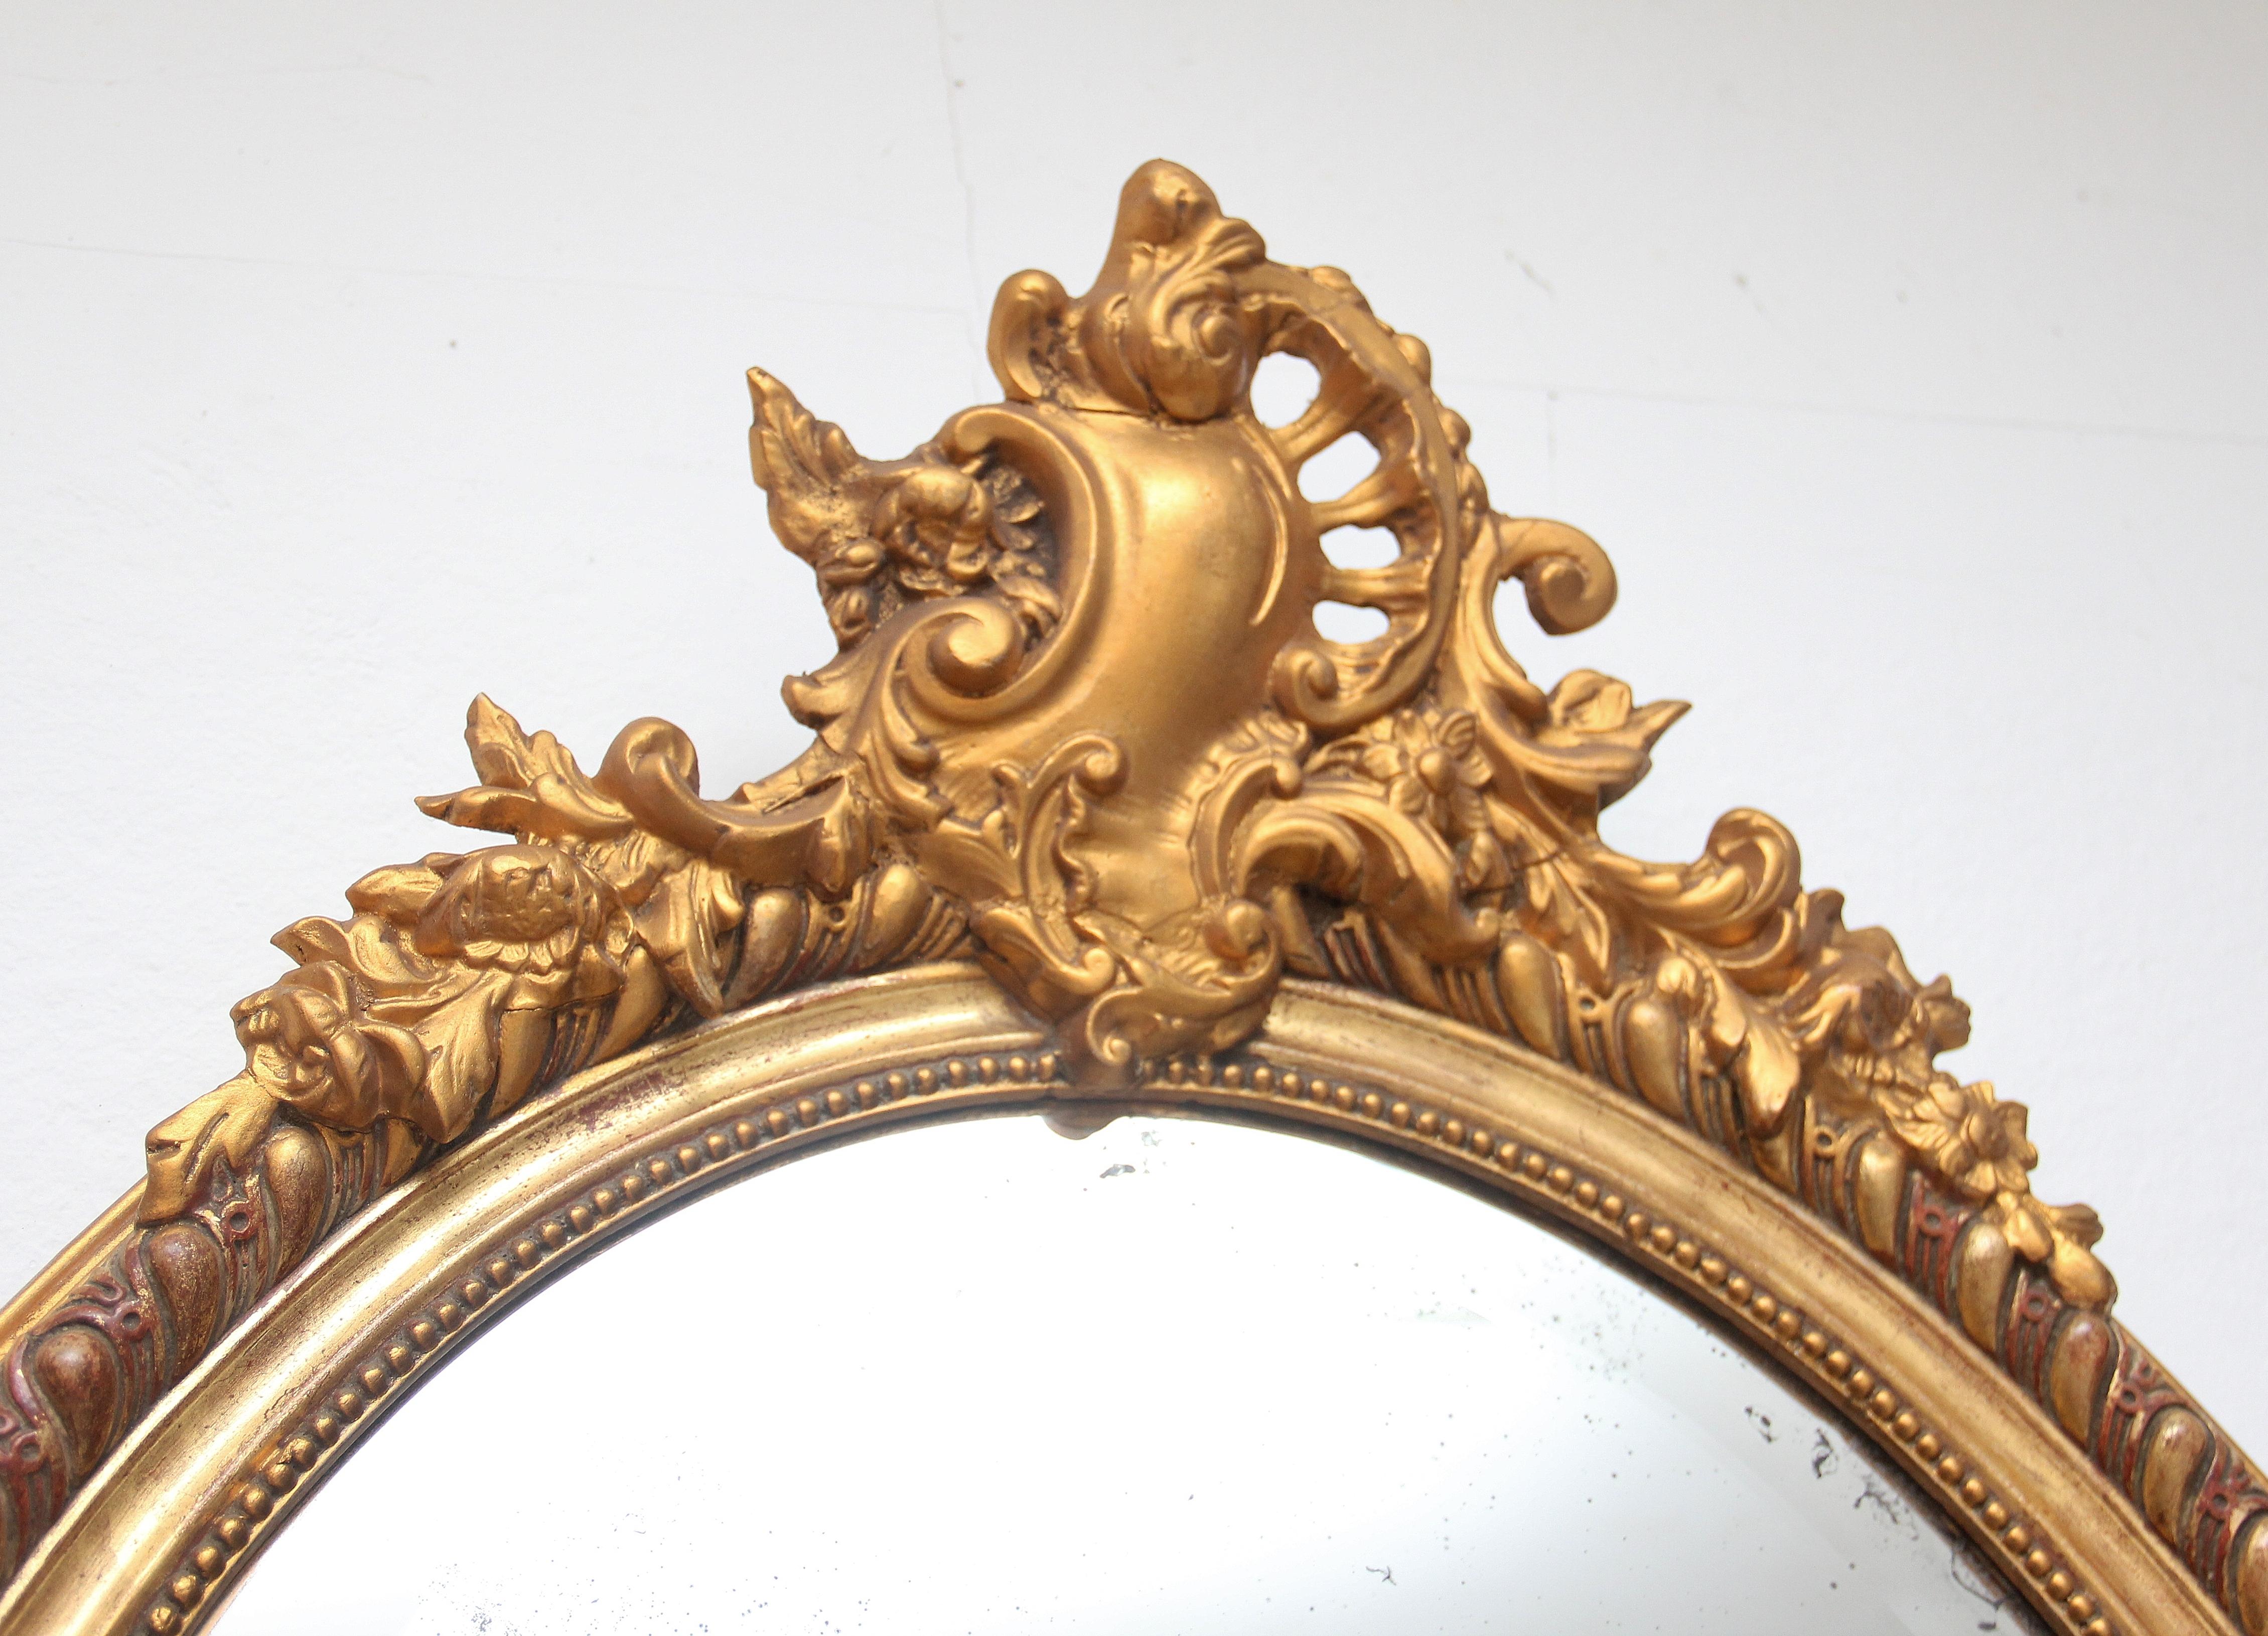 19th Century French gilt oval wall mirror, highly decorative and having an impressive oval frame with intricate decorative beading running around the inner edge and further carved decoration on the outer edge, bold floral carving at the top of the